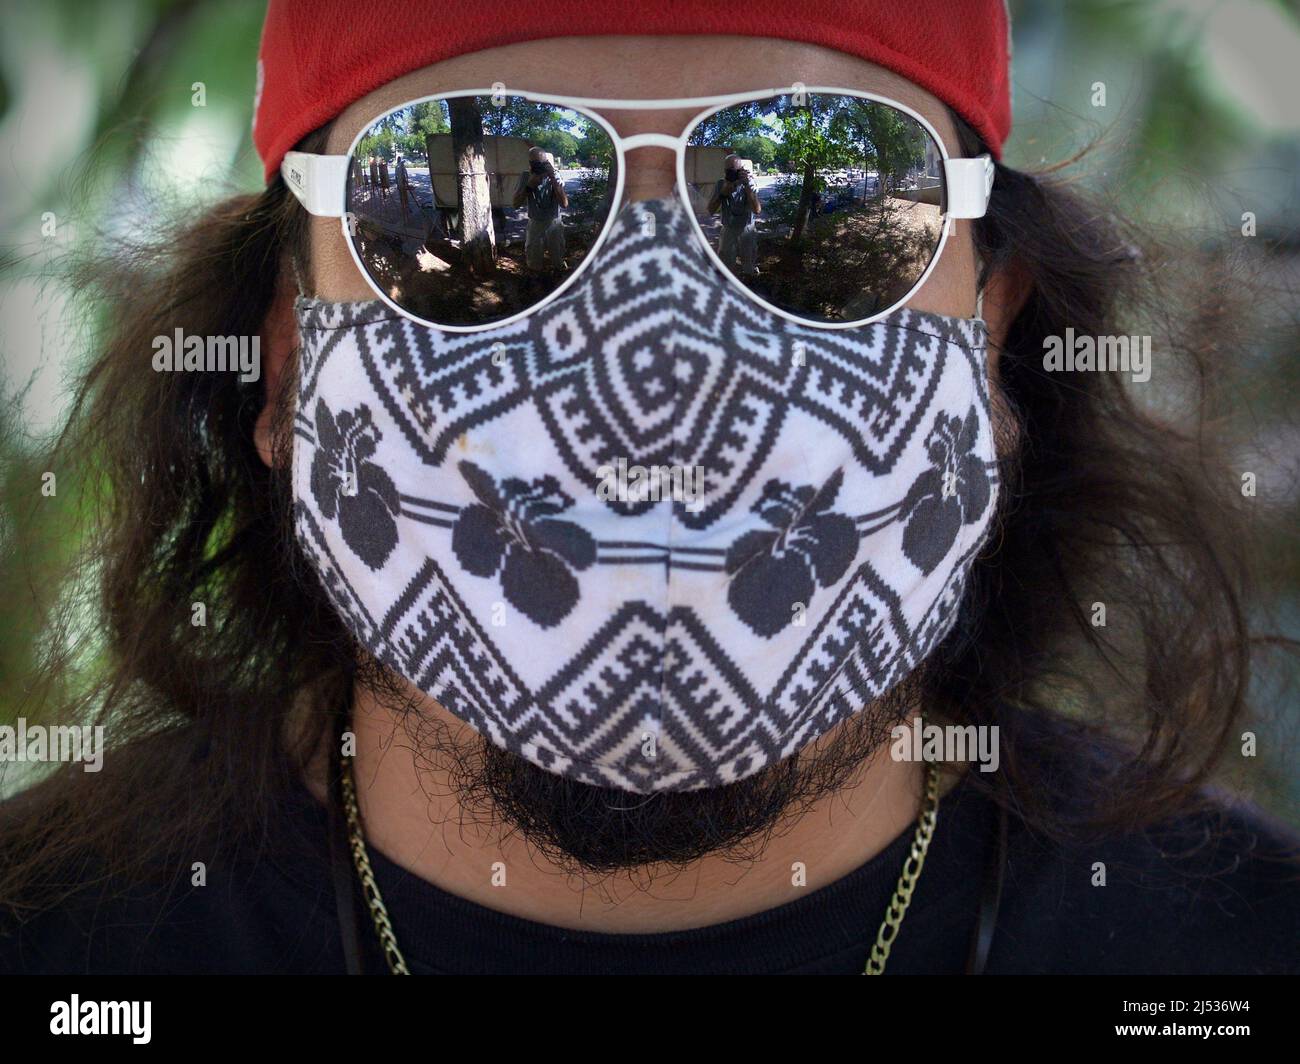 Young Caucasian man with long hair covers his face with non-medical cloth face mask and wears mirrored drop-shaped aviator sunglasses during pandemic. Stock Photo